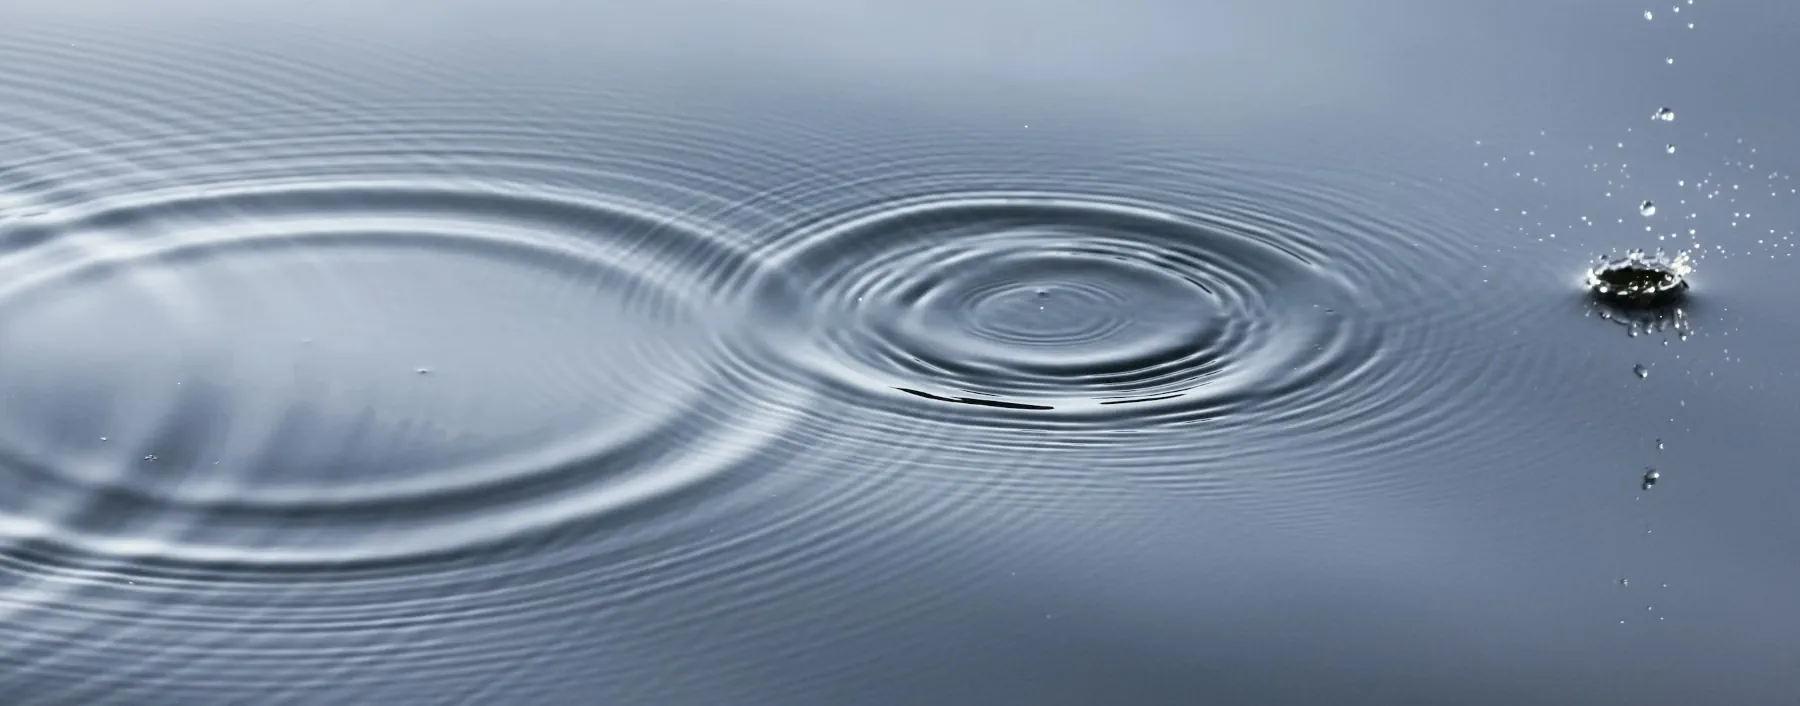 Ripples on a smooth body of water caused by a stone being dropped in it